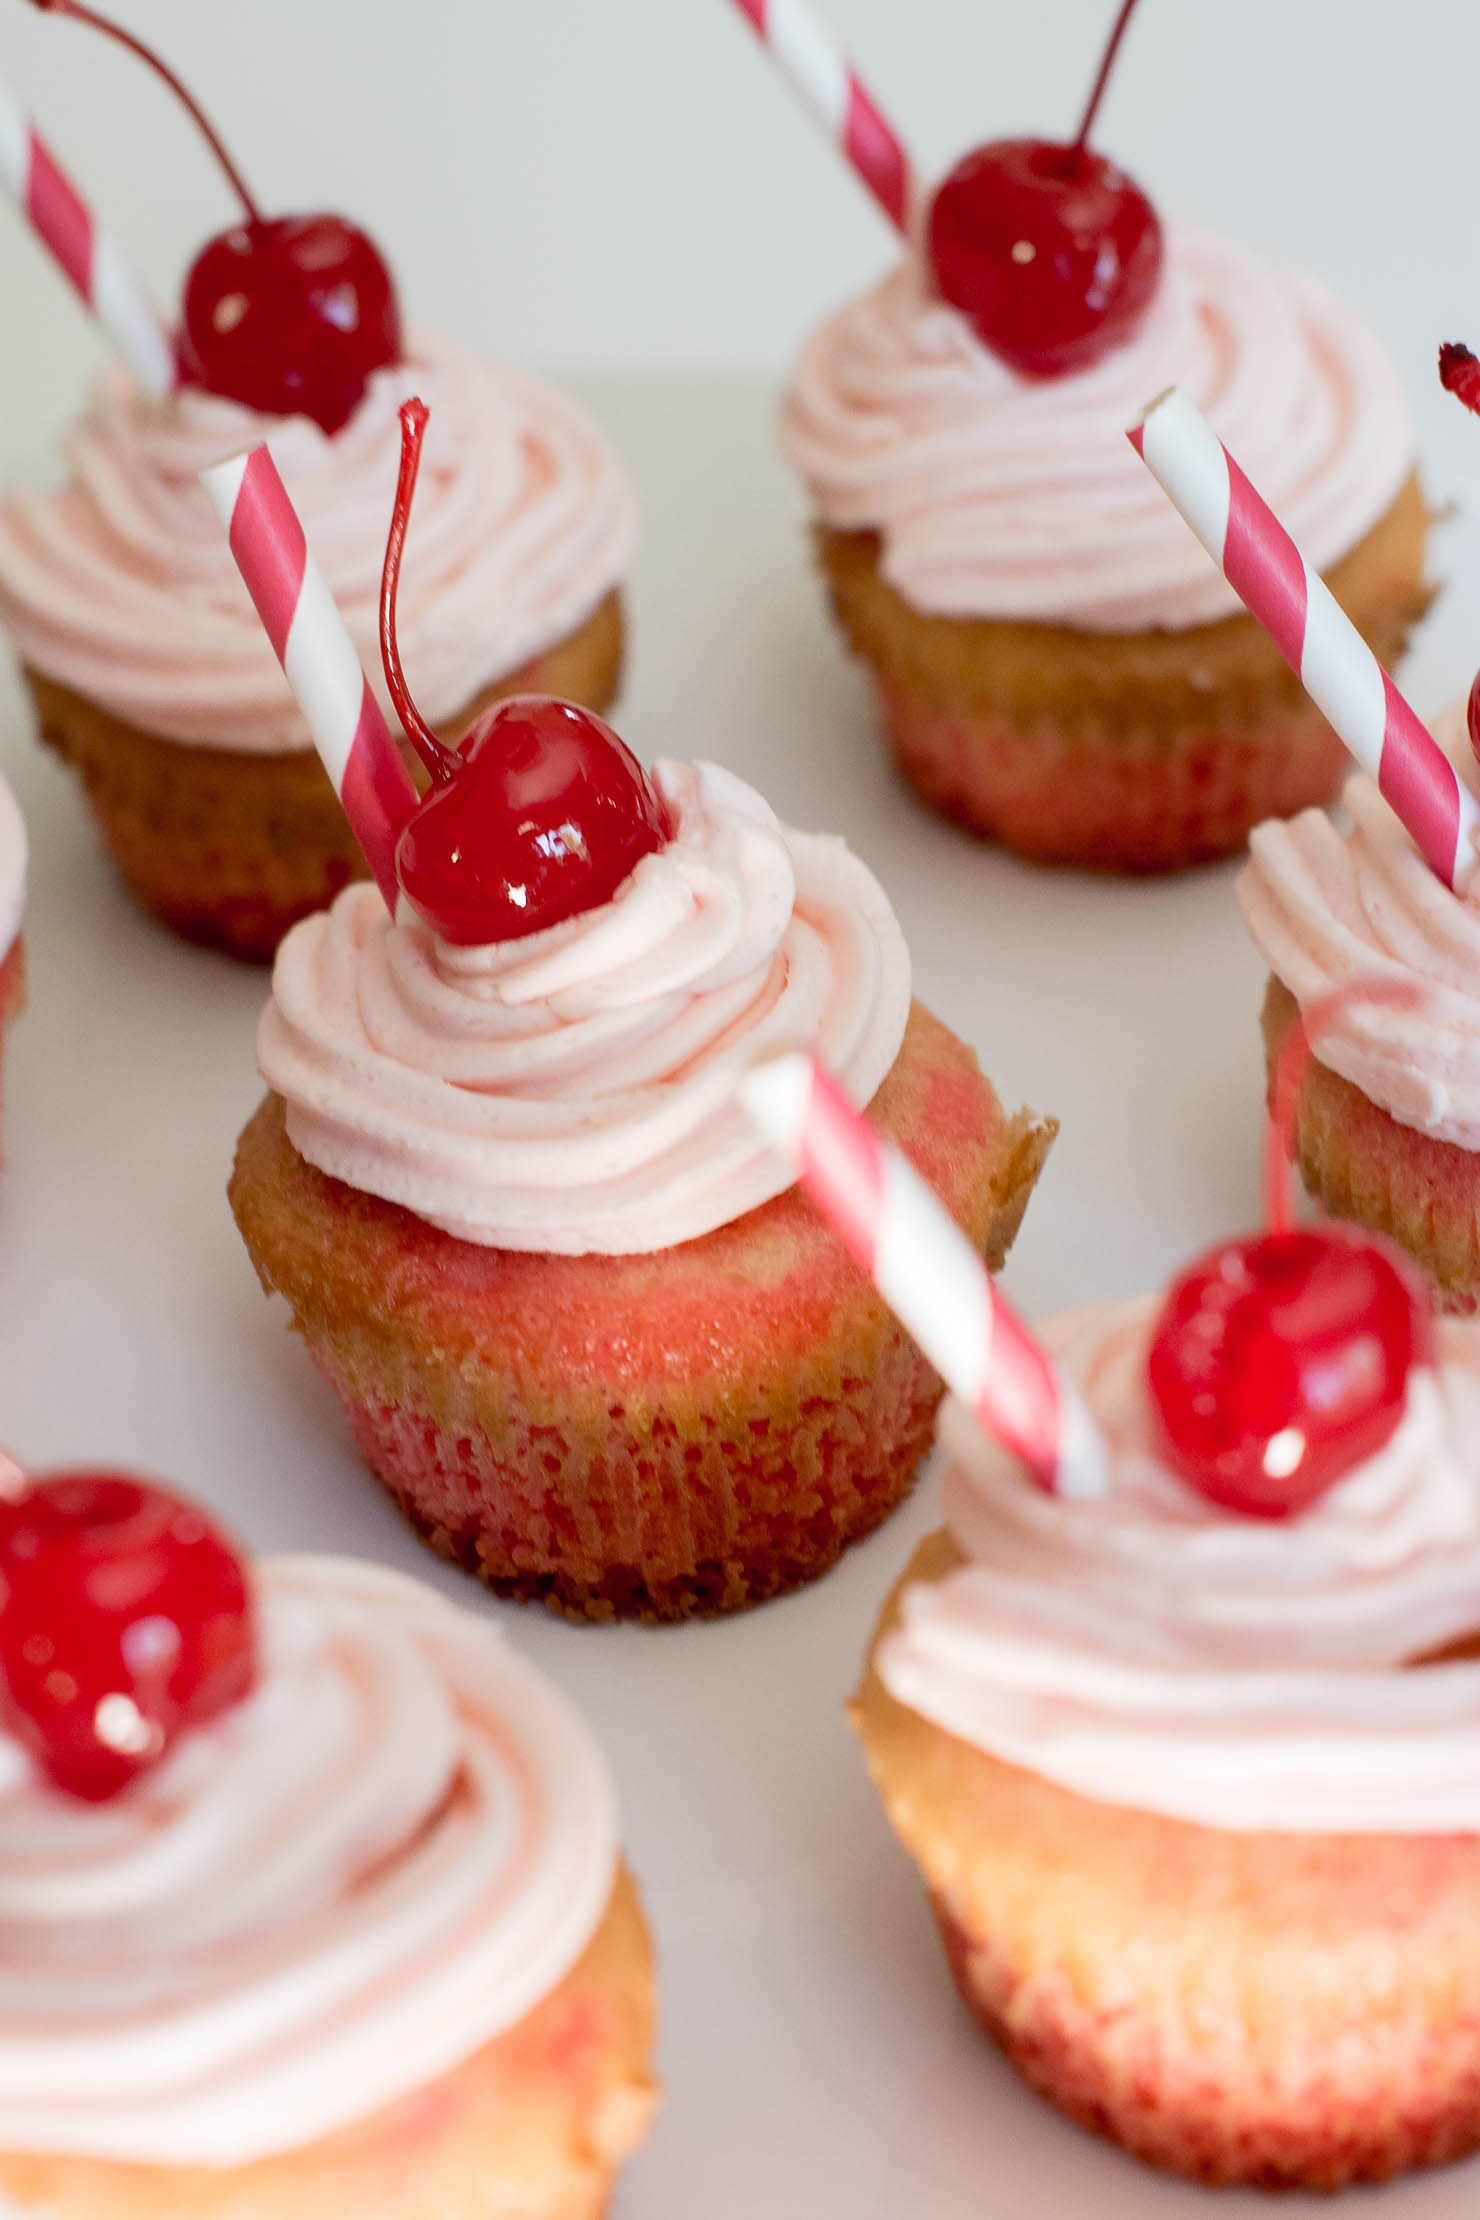 adorable shirley temple cupcakes with maraschino cherries and cherry 7up